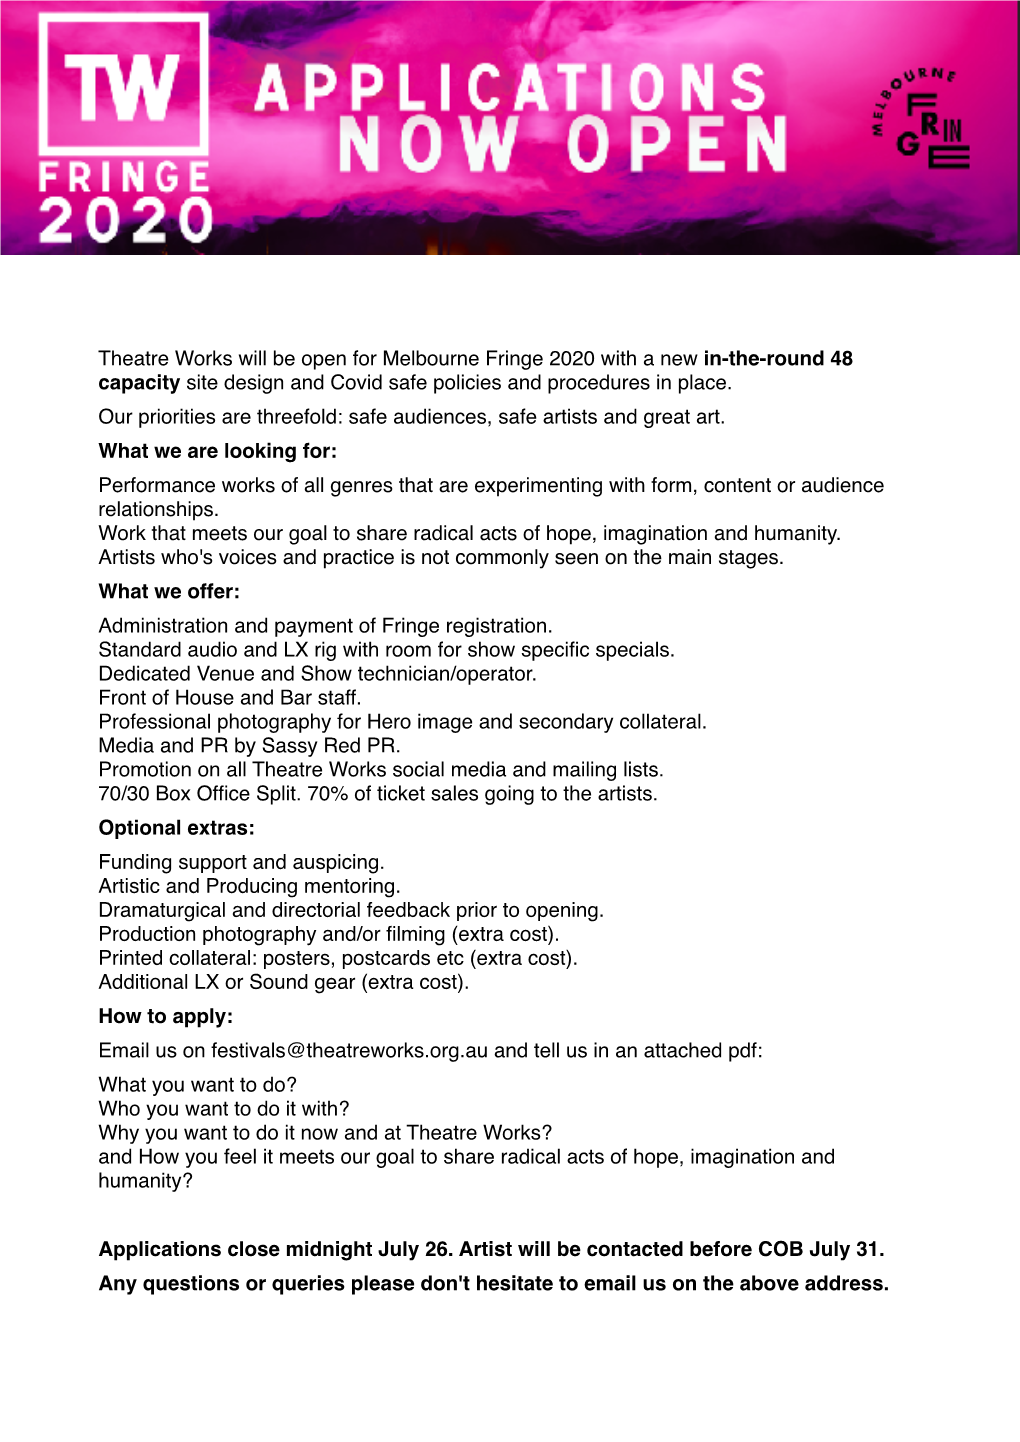 Theatre Works Will Be Open for Melbourne Fringe 2020 with a New In-The-Round 48 Capacity Site Design and Covid Safe Policies and Procedures in Place